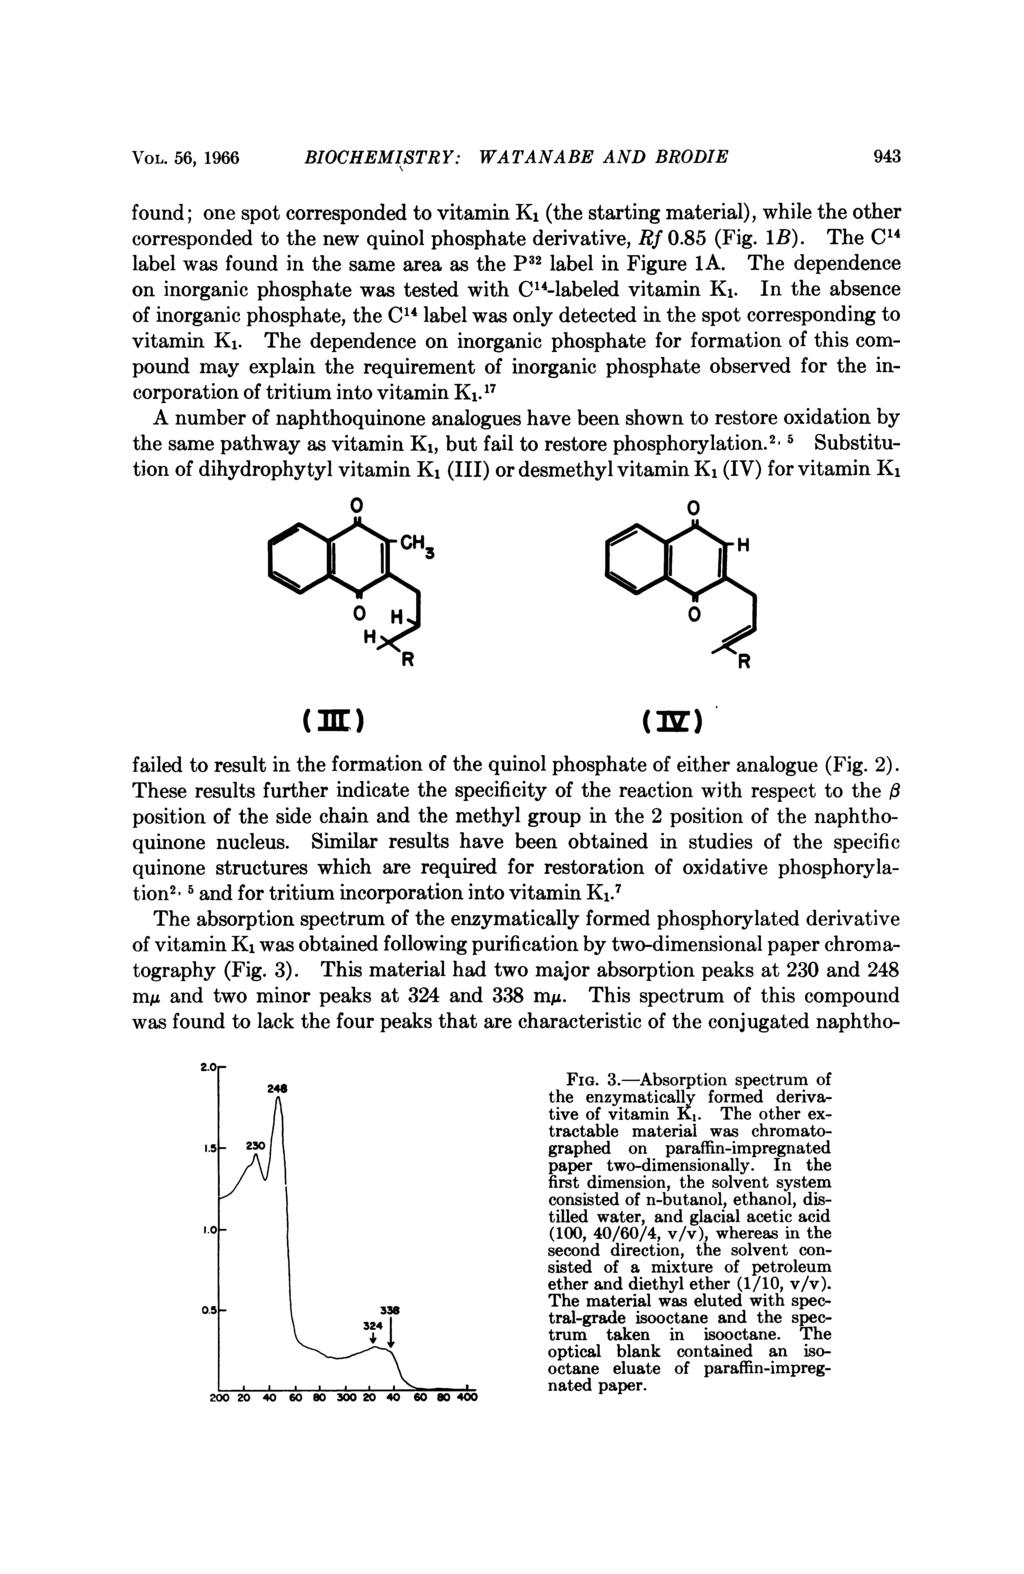 VOL. 56, 1966 BIOCHEMISTRY: WATANABE AND BRODIE 943 found; one spot corresponded to vitamin K, (the starting material), while the other corresponded to the new quinol phosphate derivative, Rf 0.